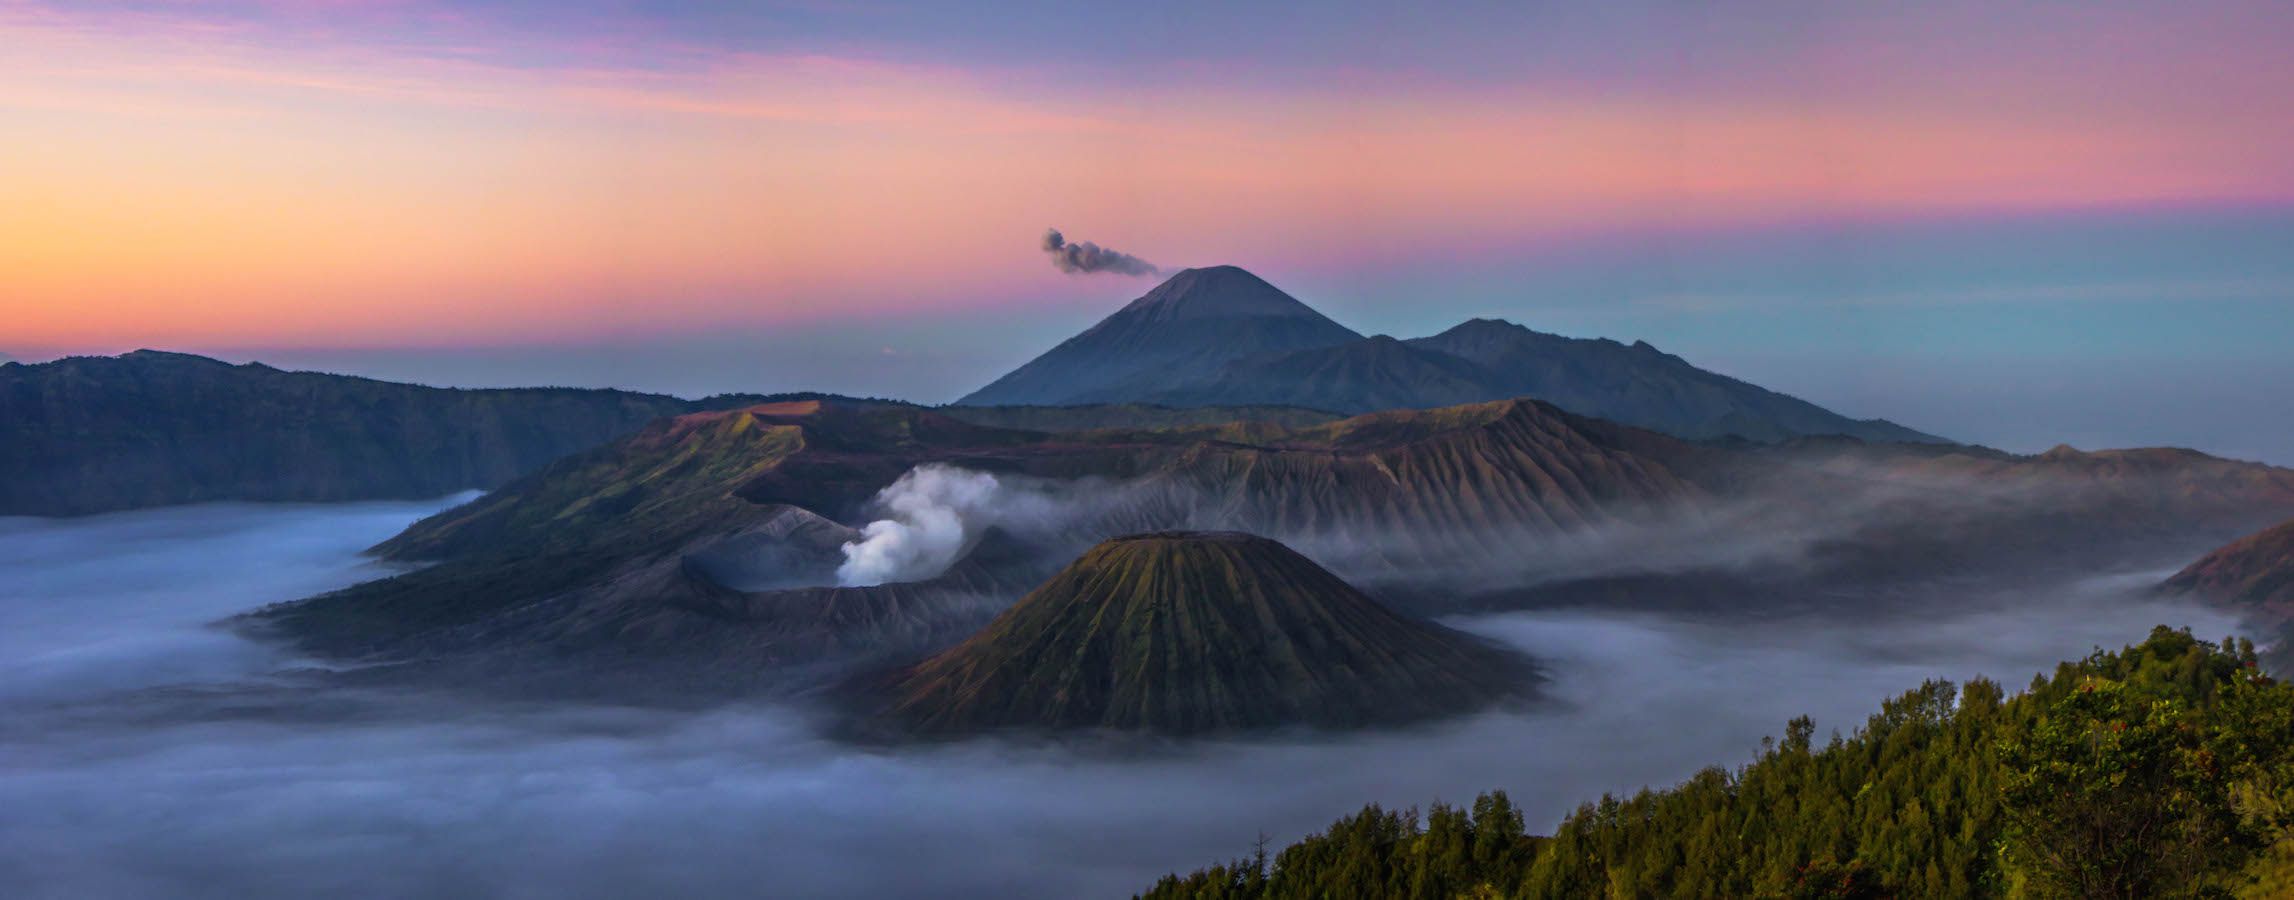 Panoramic view with Mt. Semeru spewing ash, Indonesia